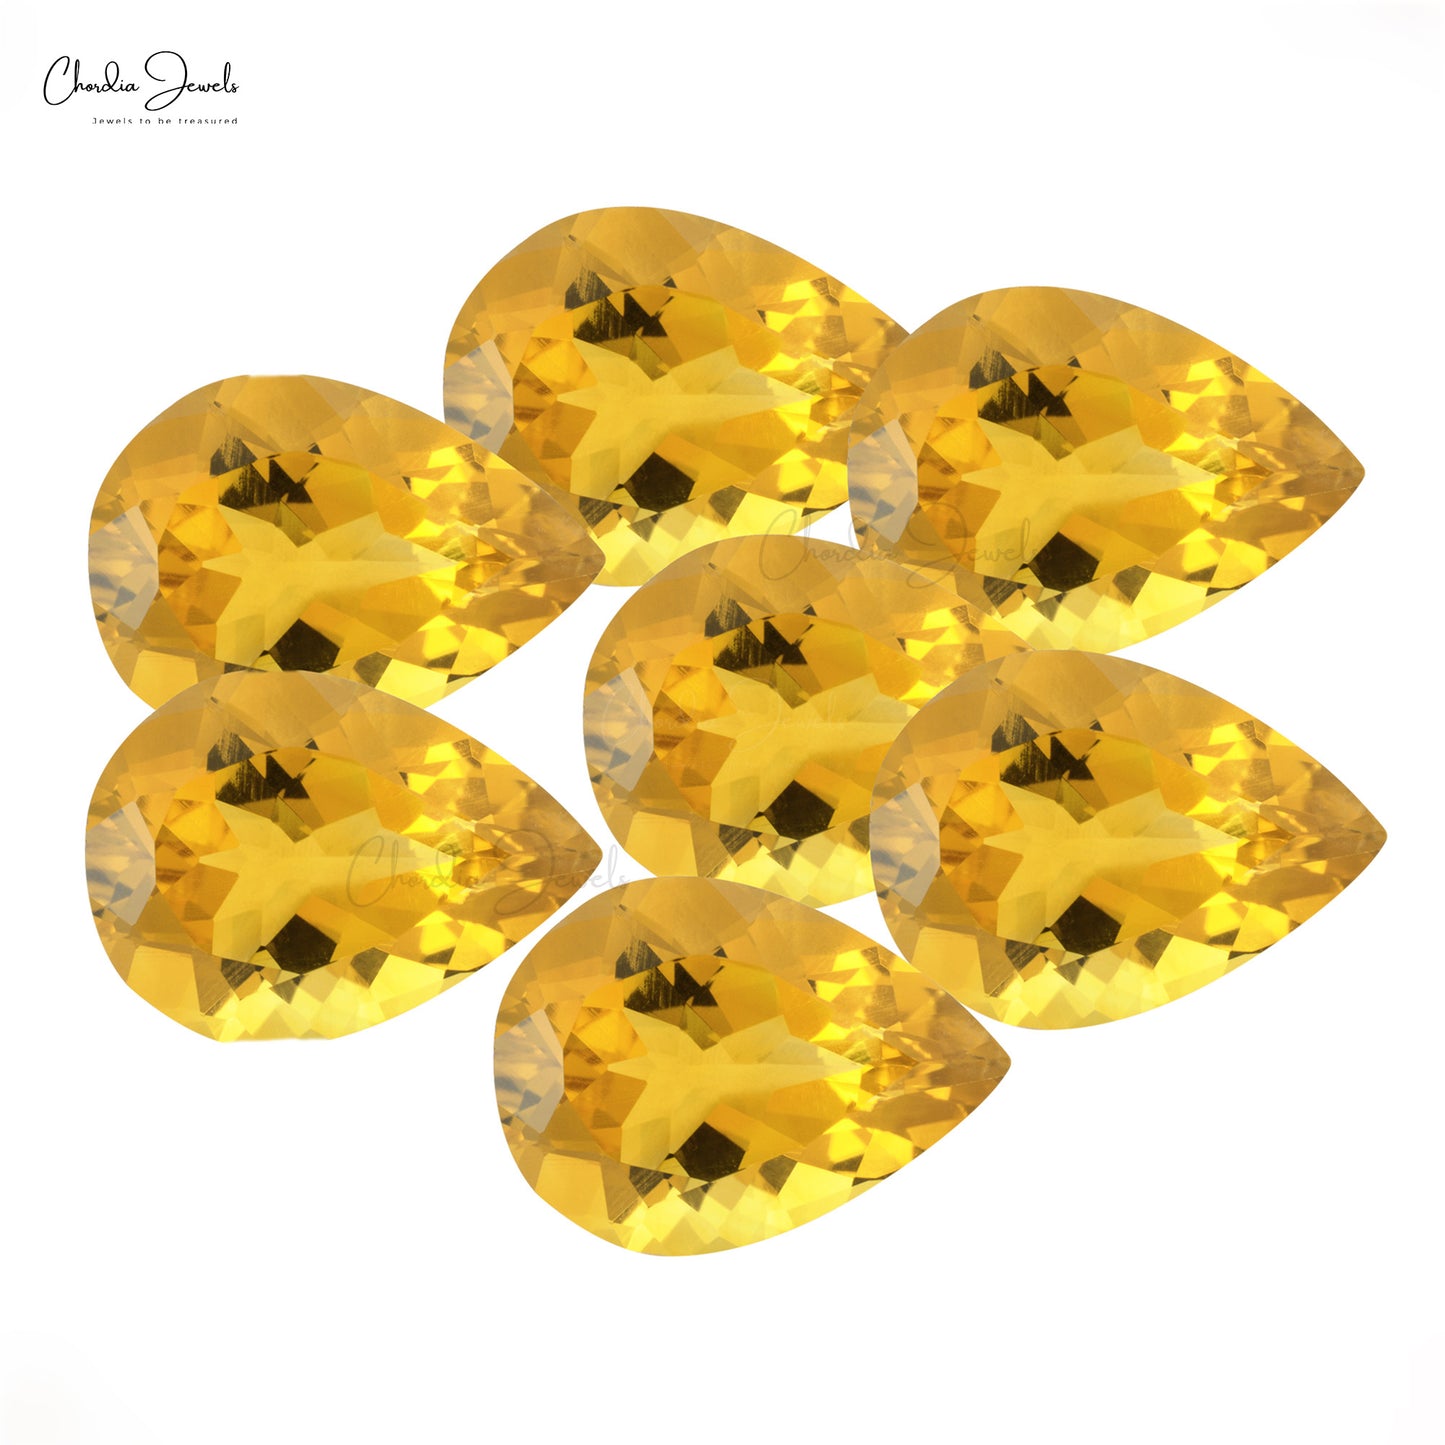 8X5MM Genuine Citrine Pear Faceted Loose Gemstone for Jewelry Setting, 1 Piece